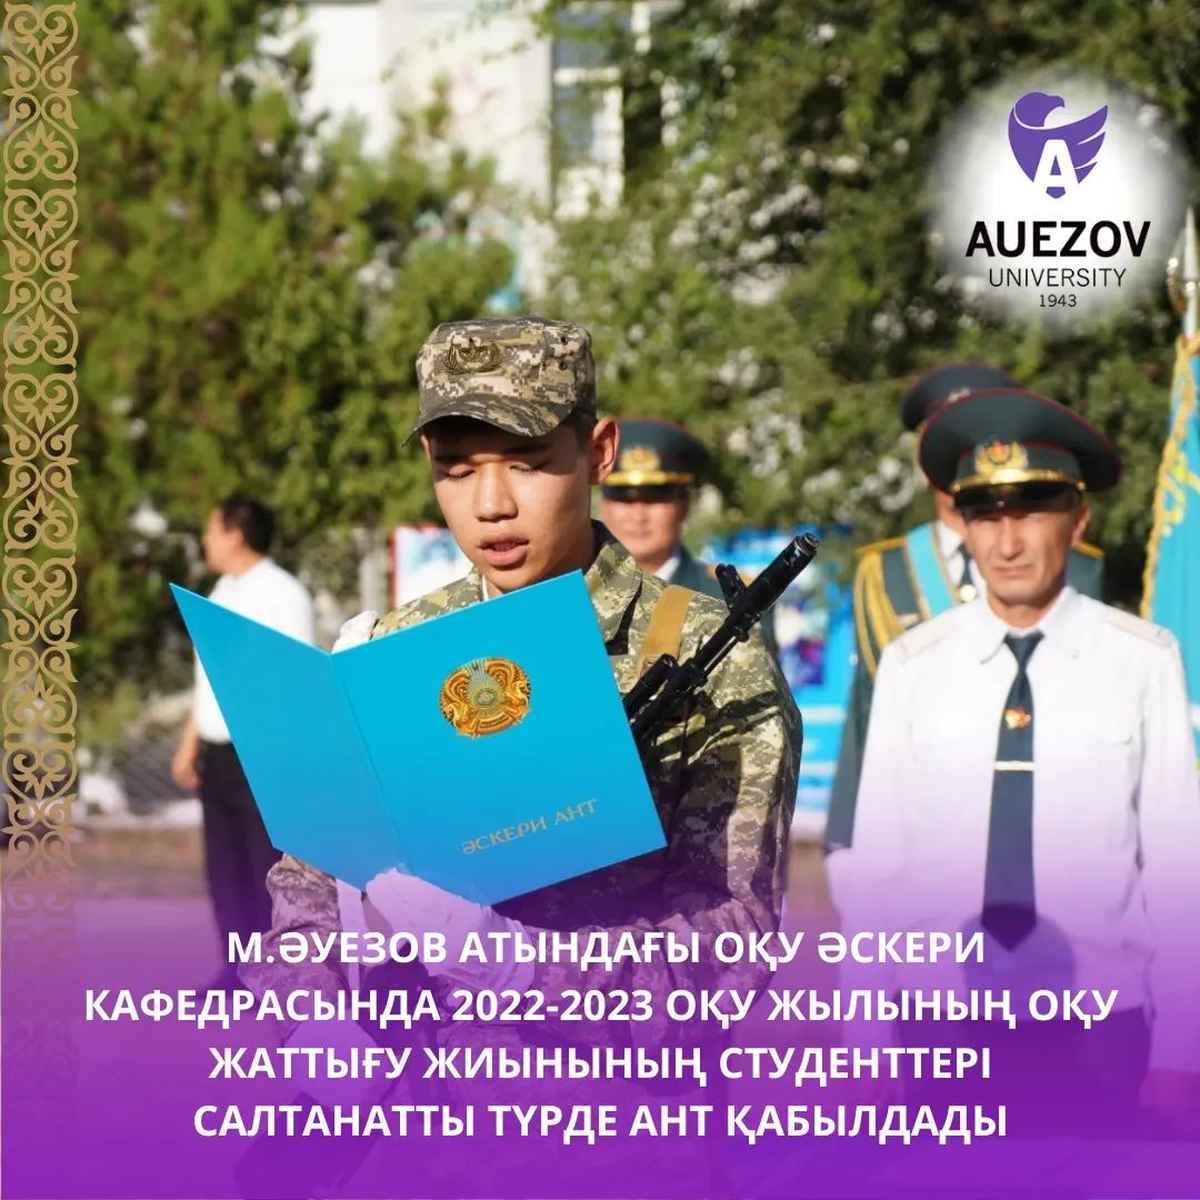 Students of the training camp of the 2022-2023 academic year took the oath of office at the military training department named after M. Auezov